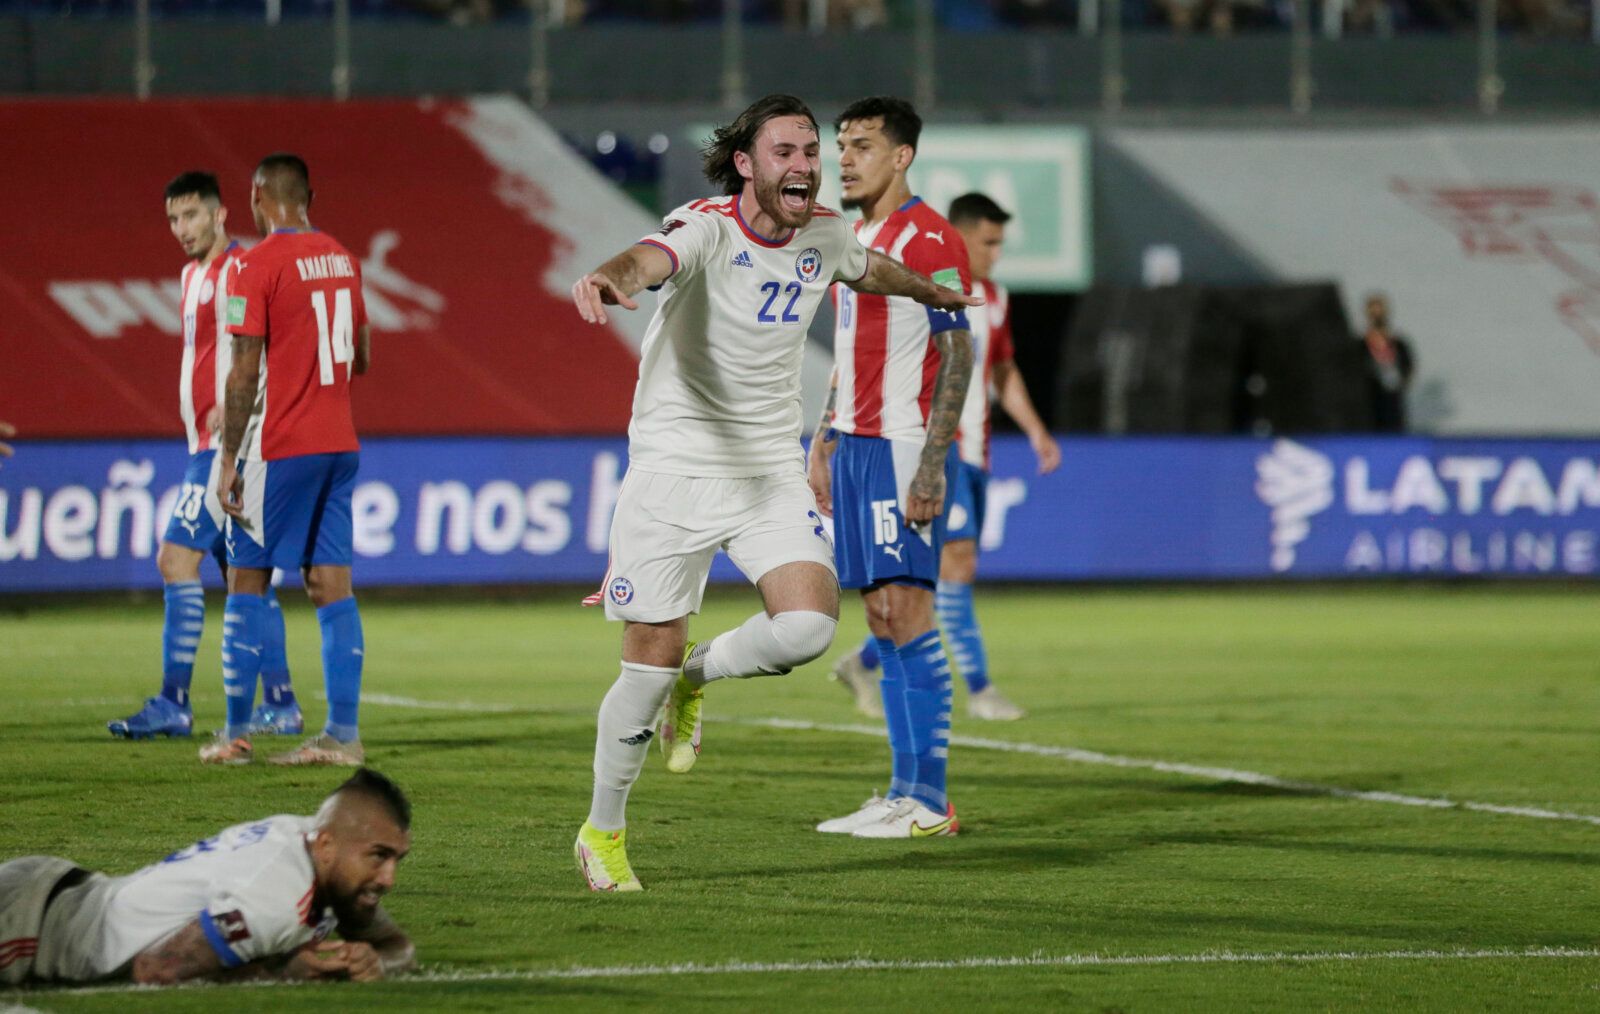 Soccer Football - World Cup - South American Qualifiers - Paraguay v Chile - Defensores del Chaco, Asuncion, Paraguay - November 11, 2021 Chile's Ben Brereton celebrates after Paraguay's Antony Silva scored an own goal and their first goal REUTERS/Cesar Olmedo